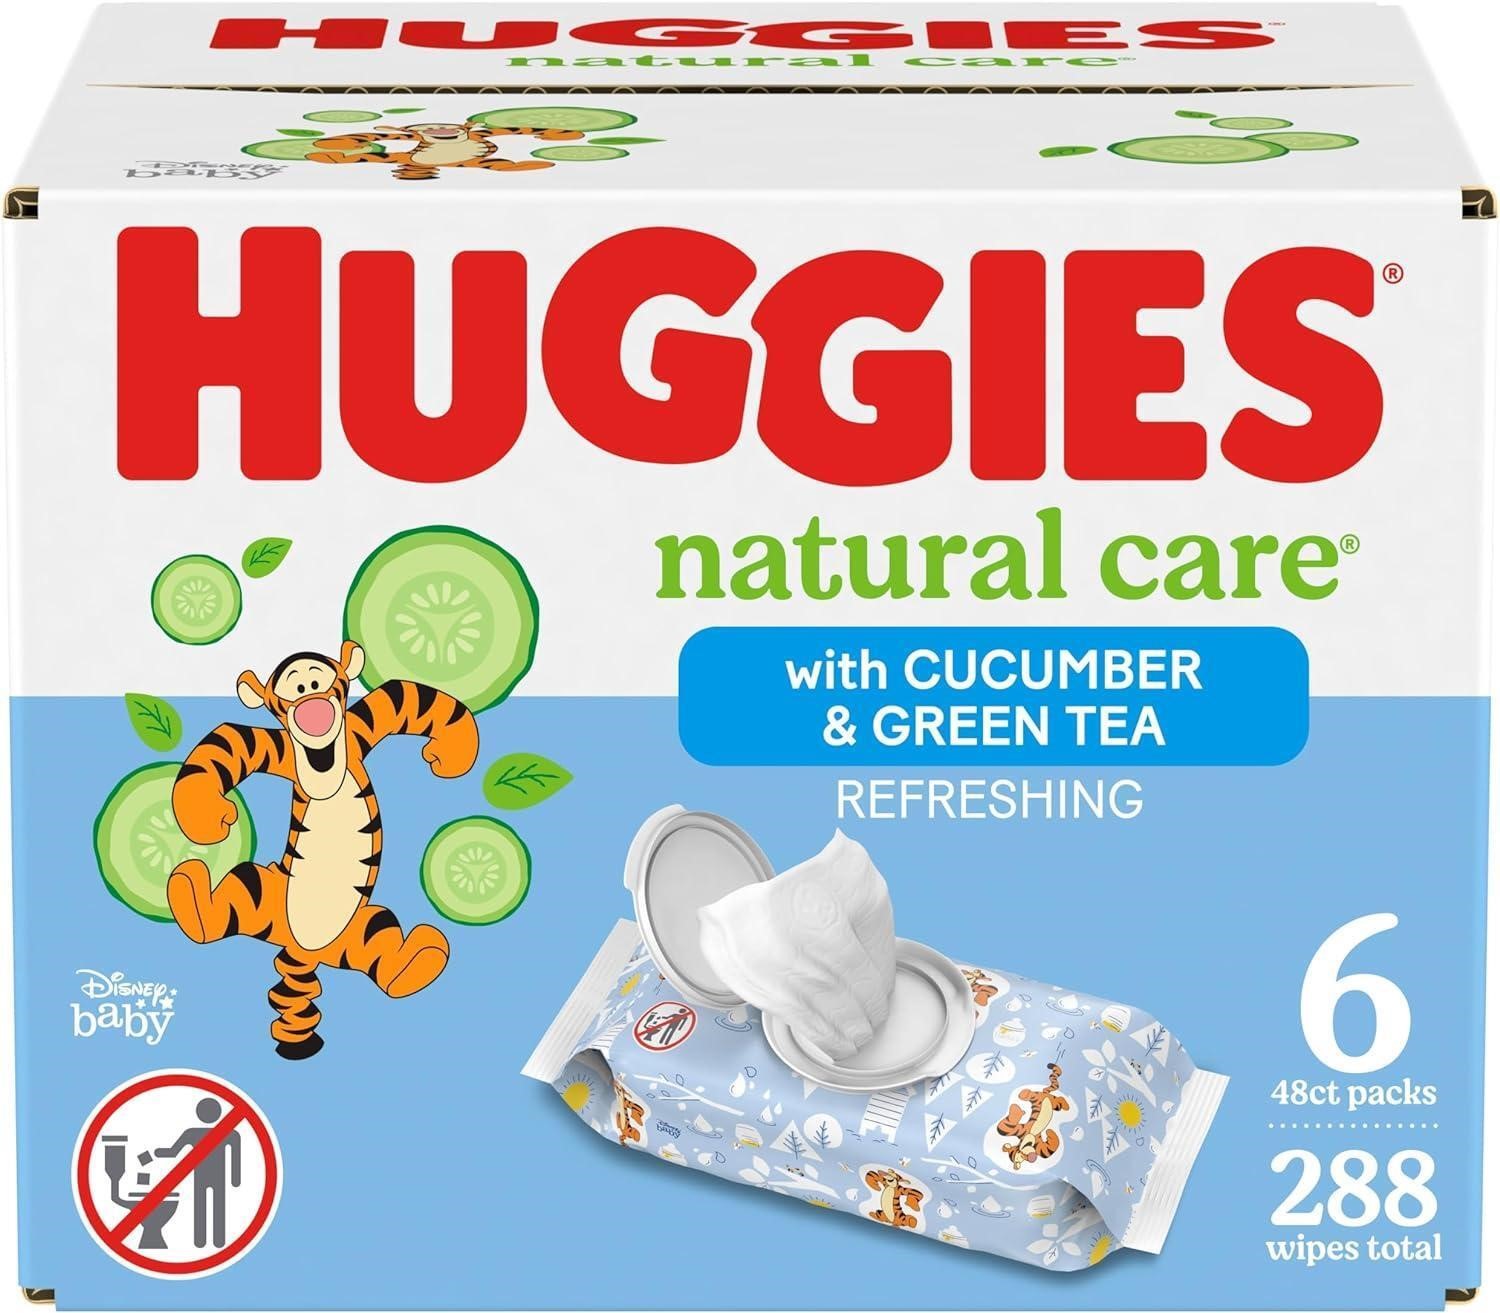 SEALED-Huggies Scented Baby Wipes